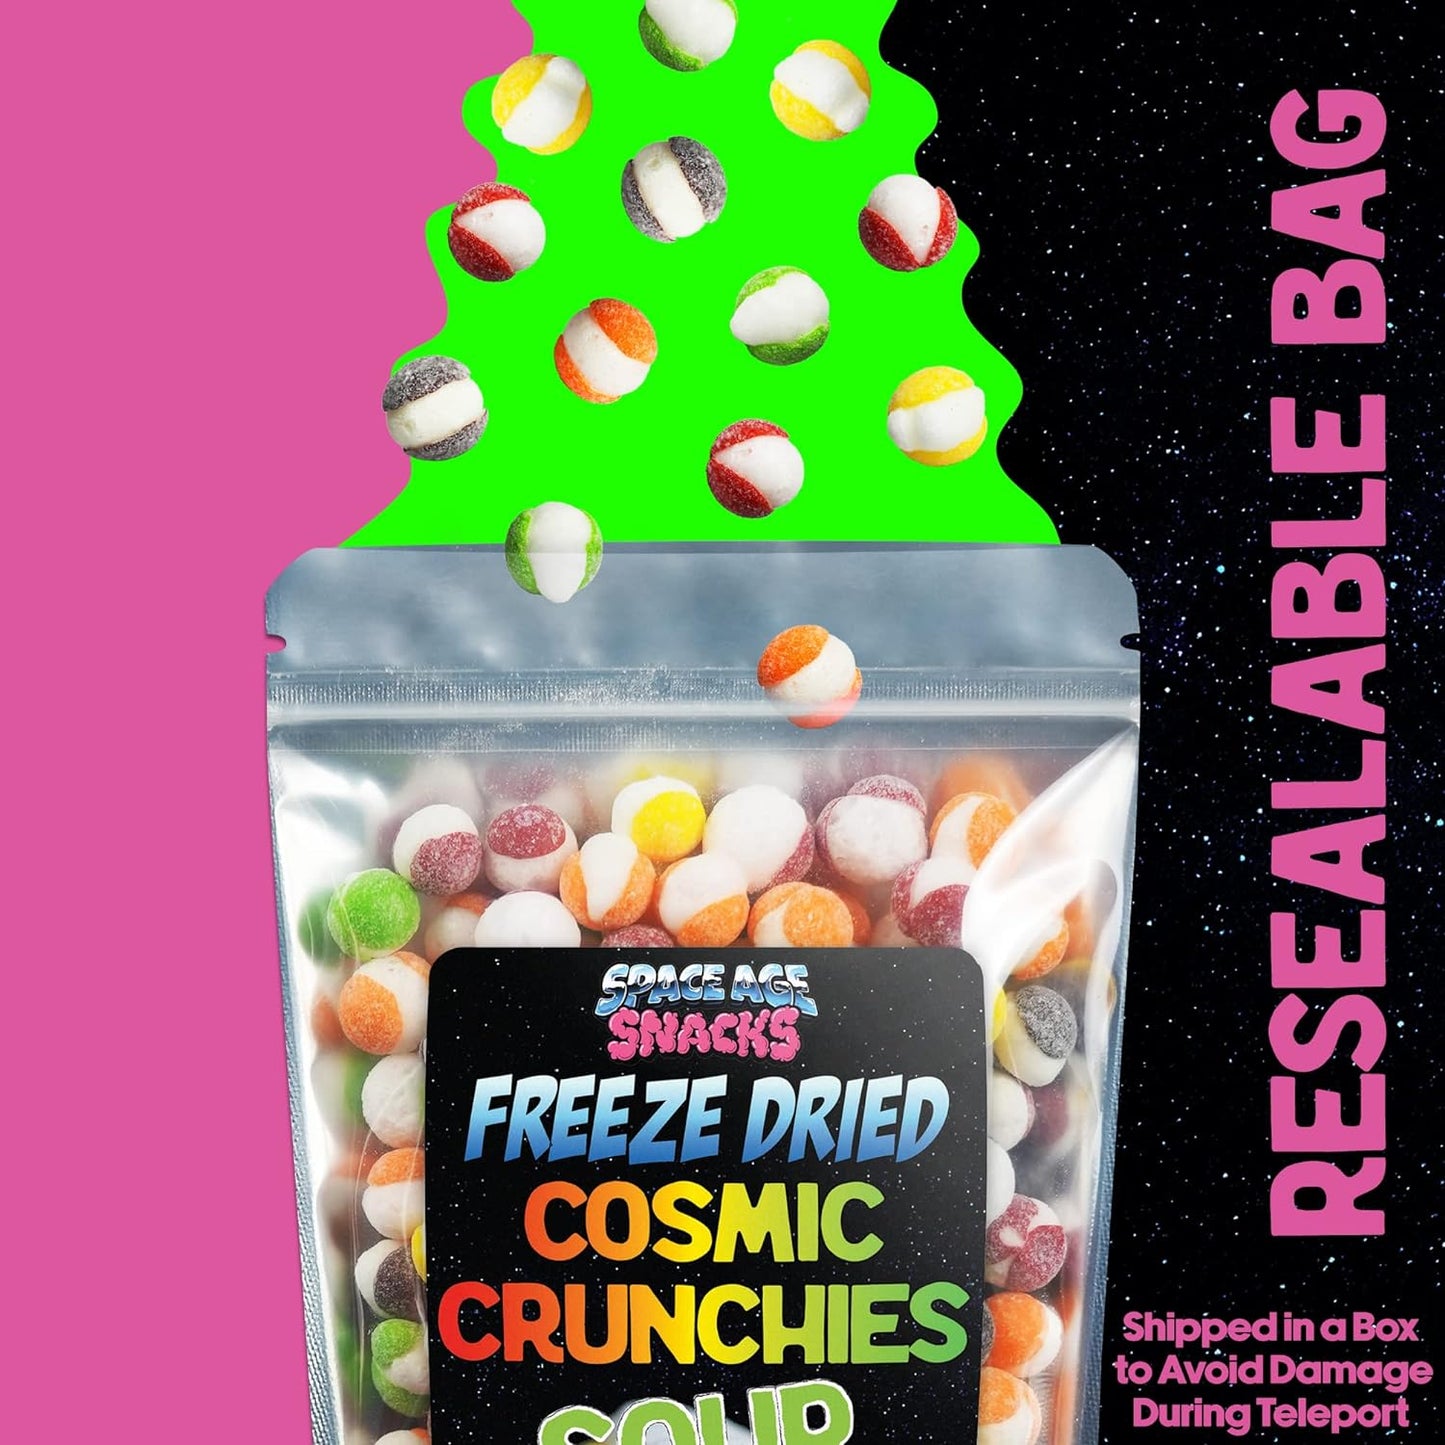 Premium Freeze Dried Sour Skittles - Cosmic Crunchies Dried Candy - Freetles Dry Candy for All Ages (4 Ounce)